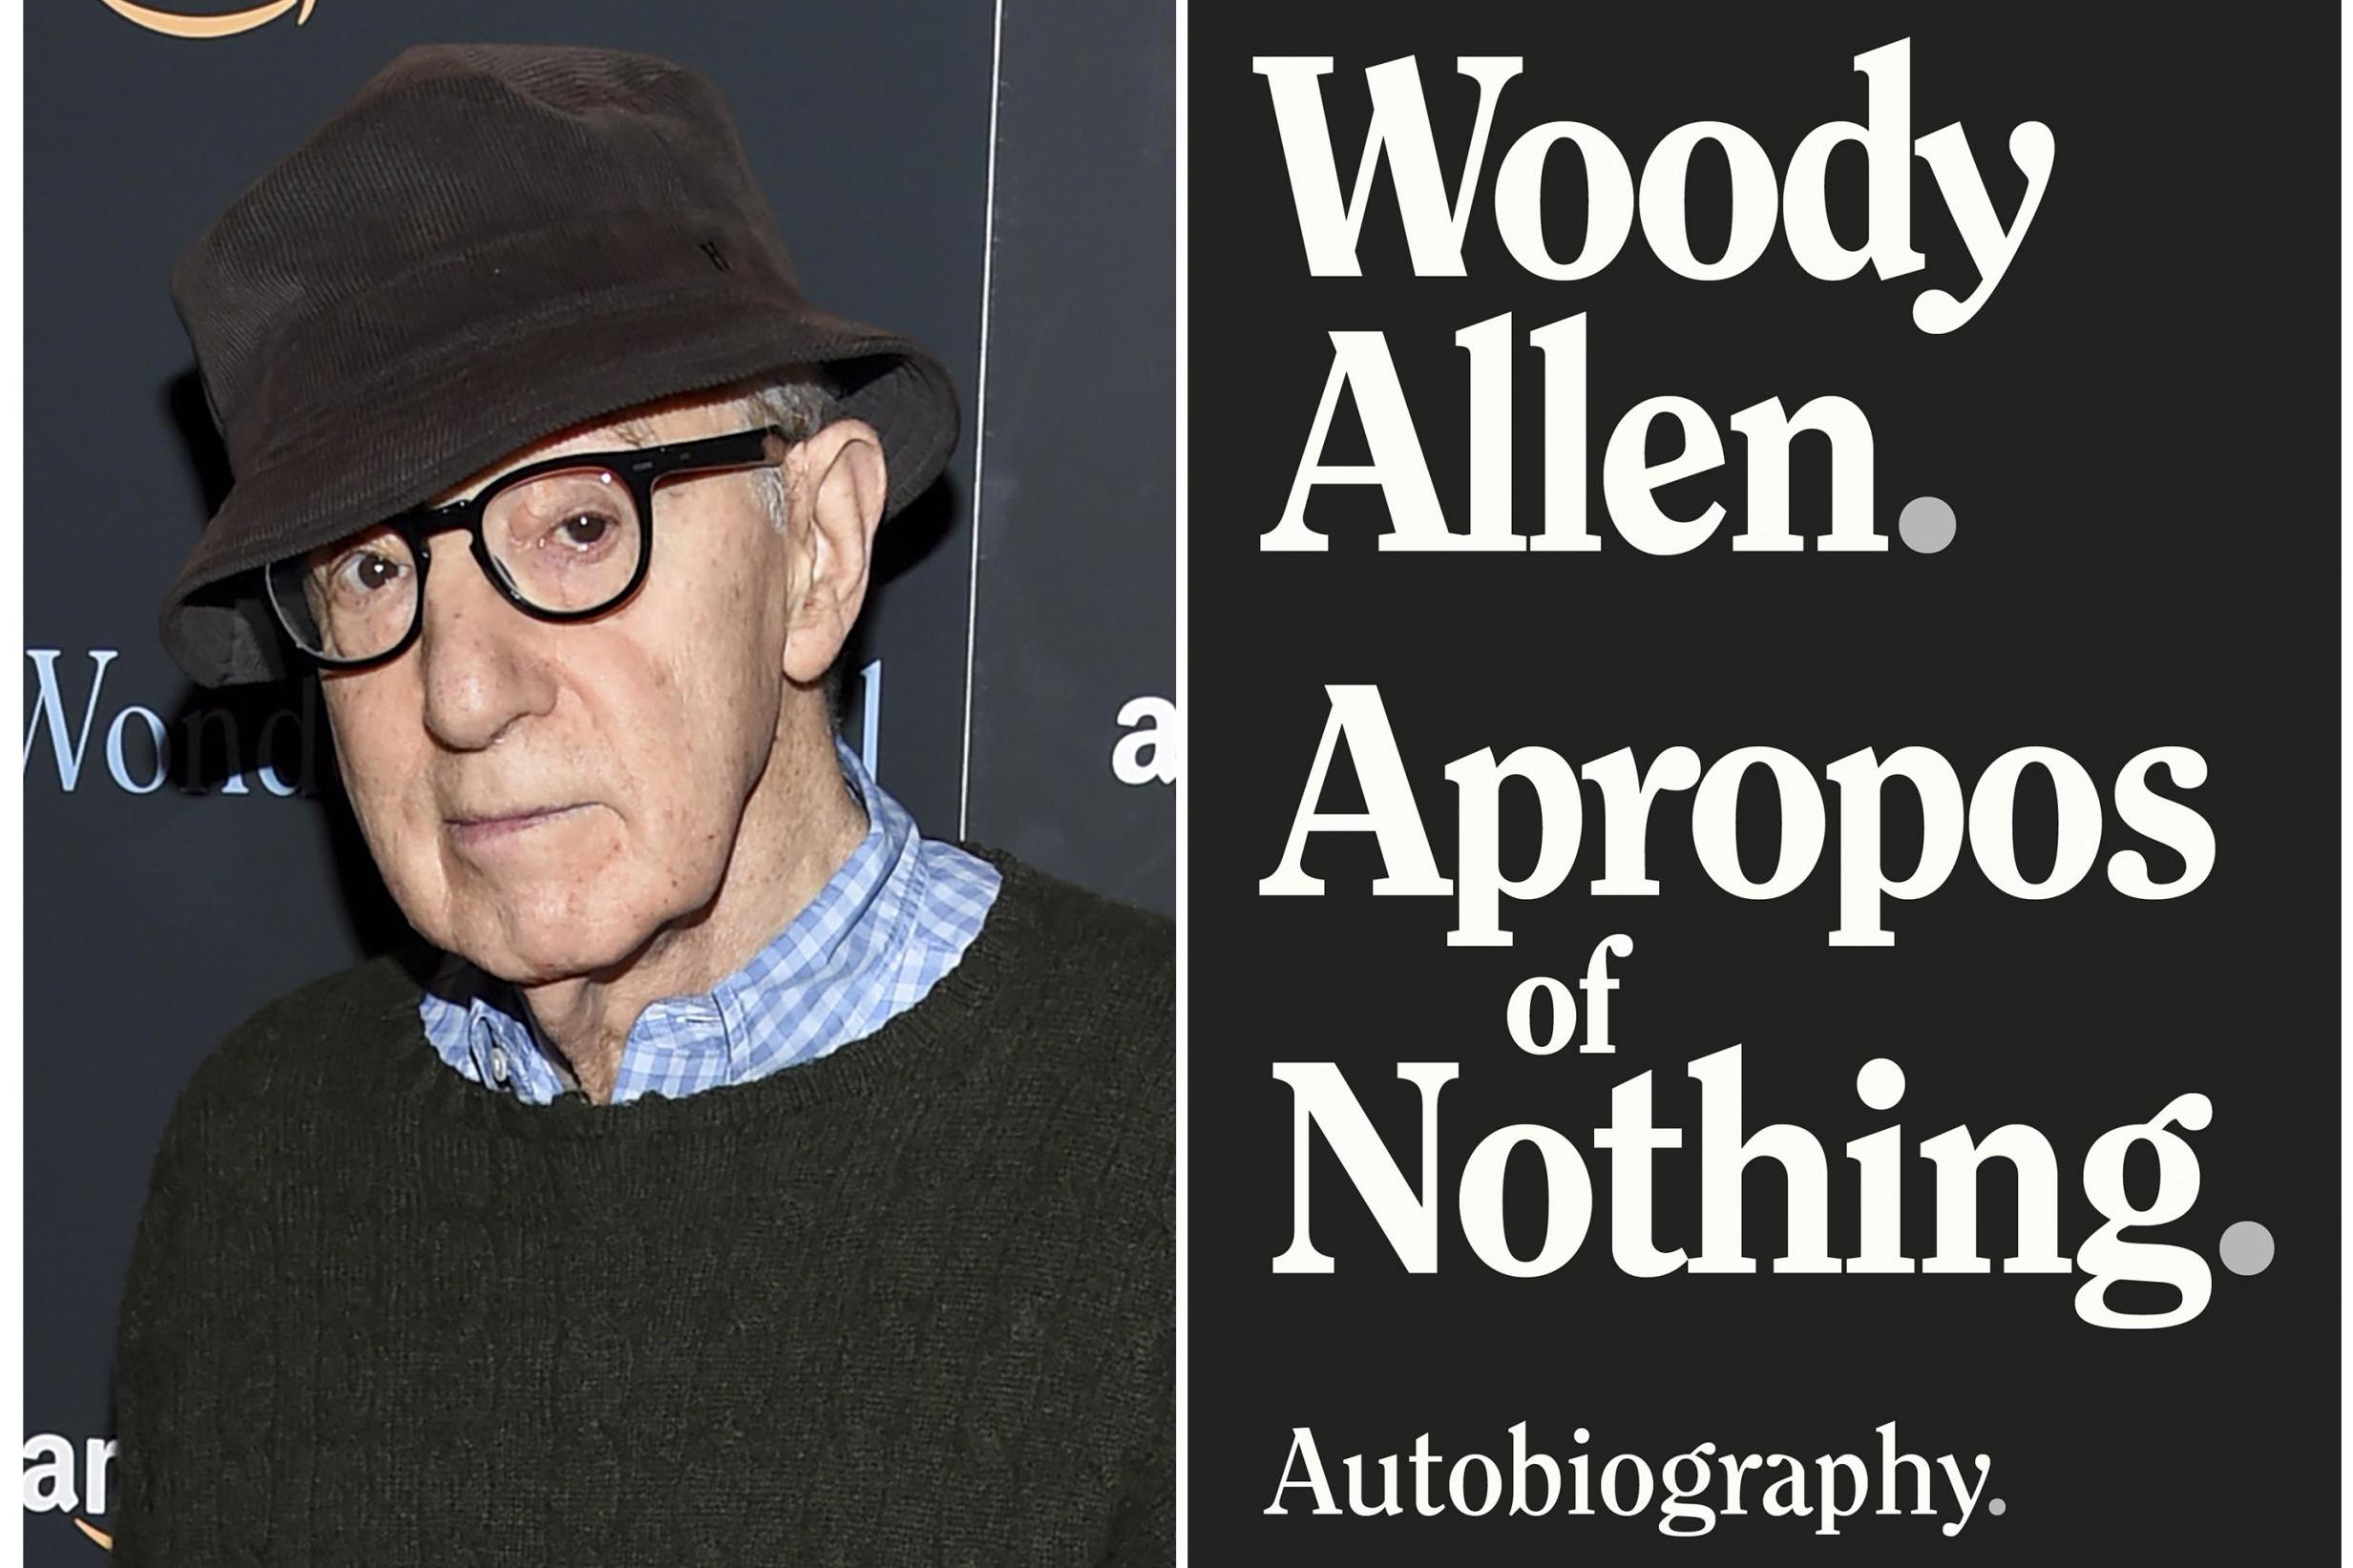 Woody Allen's memoir 'Apropos of Nothing' was published on Monday.